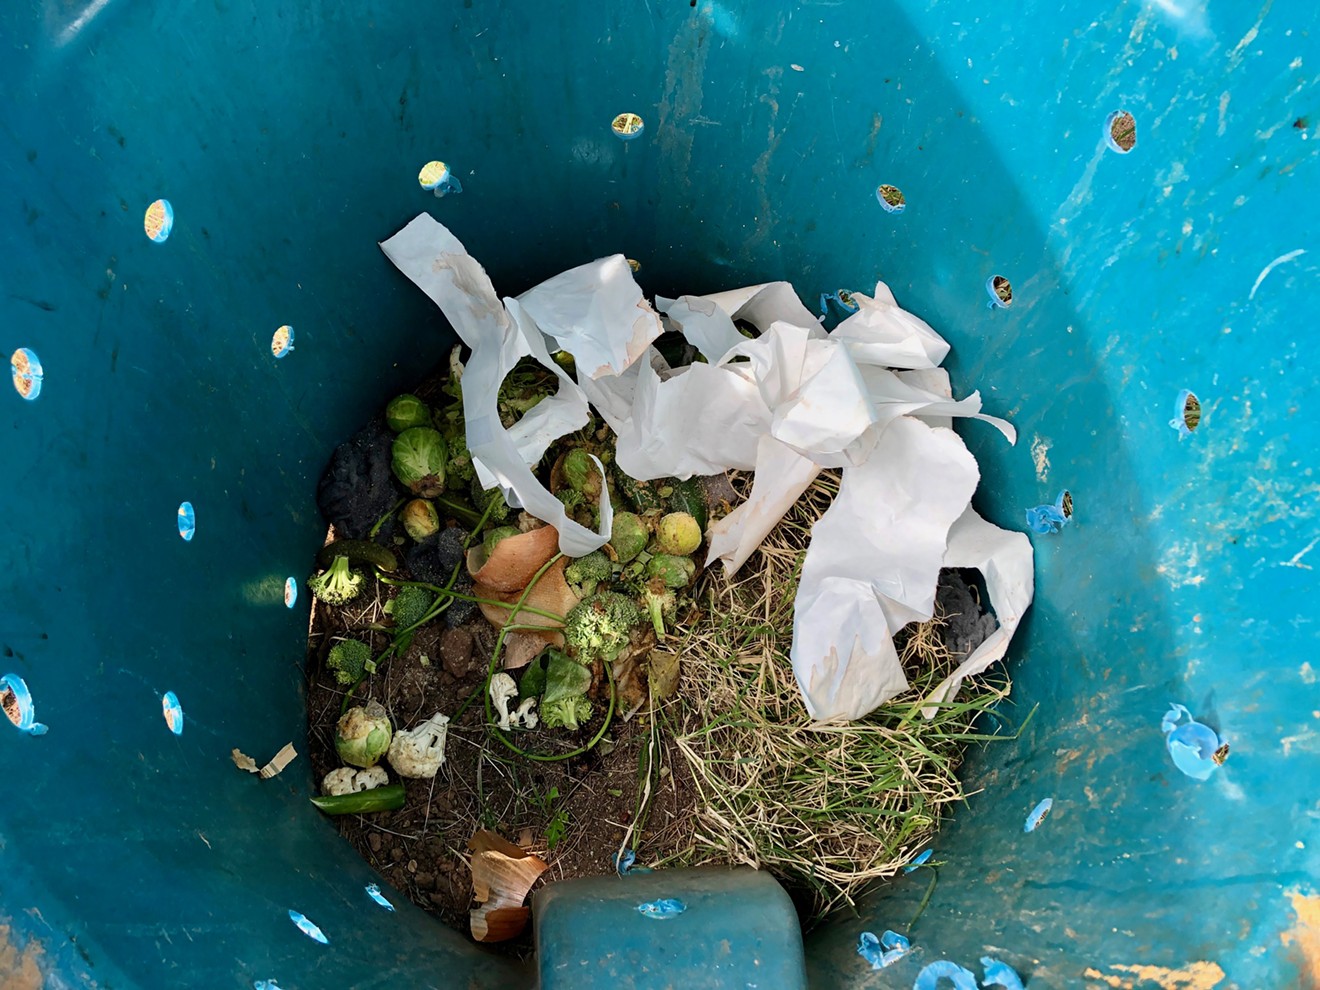 A beginner's guide to DIY composting.